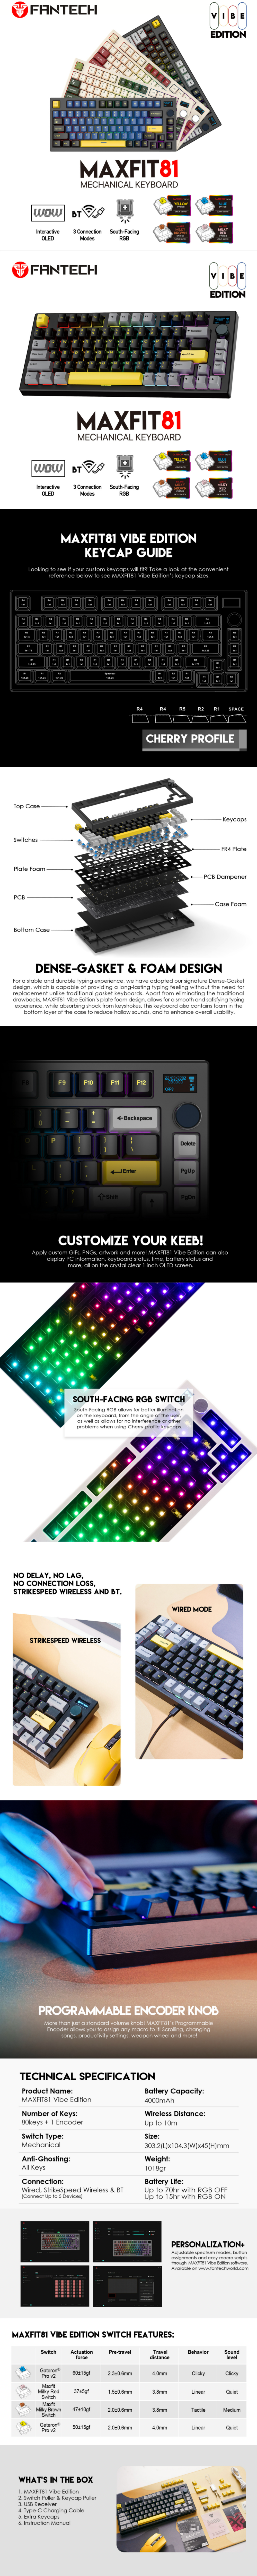 A large marketing image providing additional information about the product Fantech MAXFIT81 Wireless Hot-Swappable RGB Mechanical Bluetooth Keyboard (Milky Matcha - Yellow Switch) - Additional alt info not provided